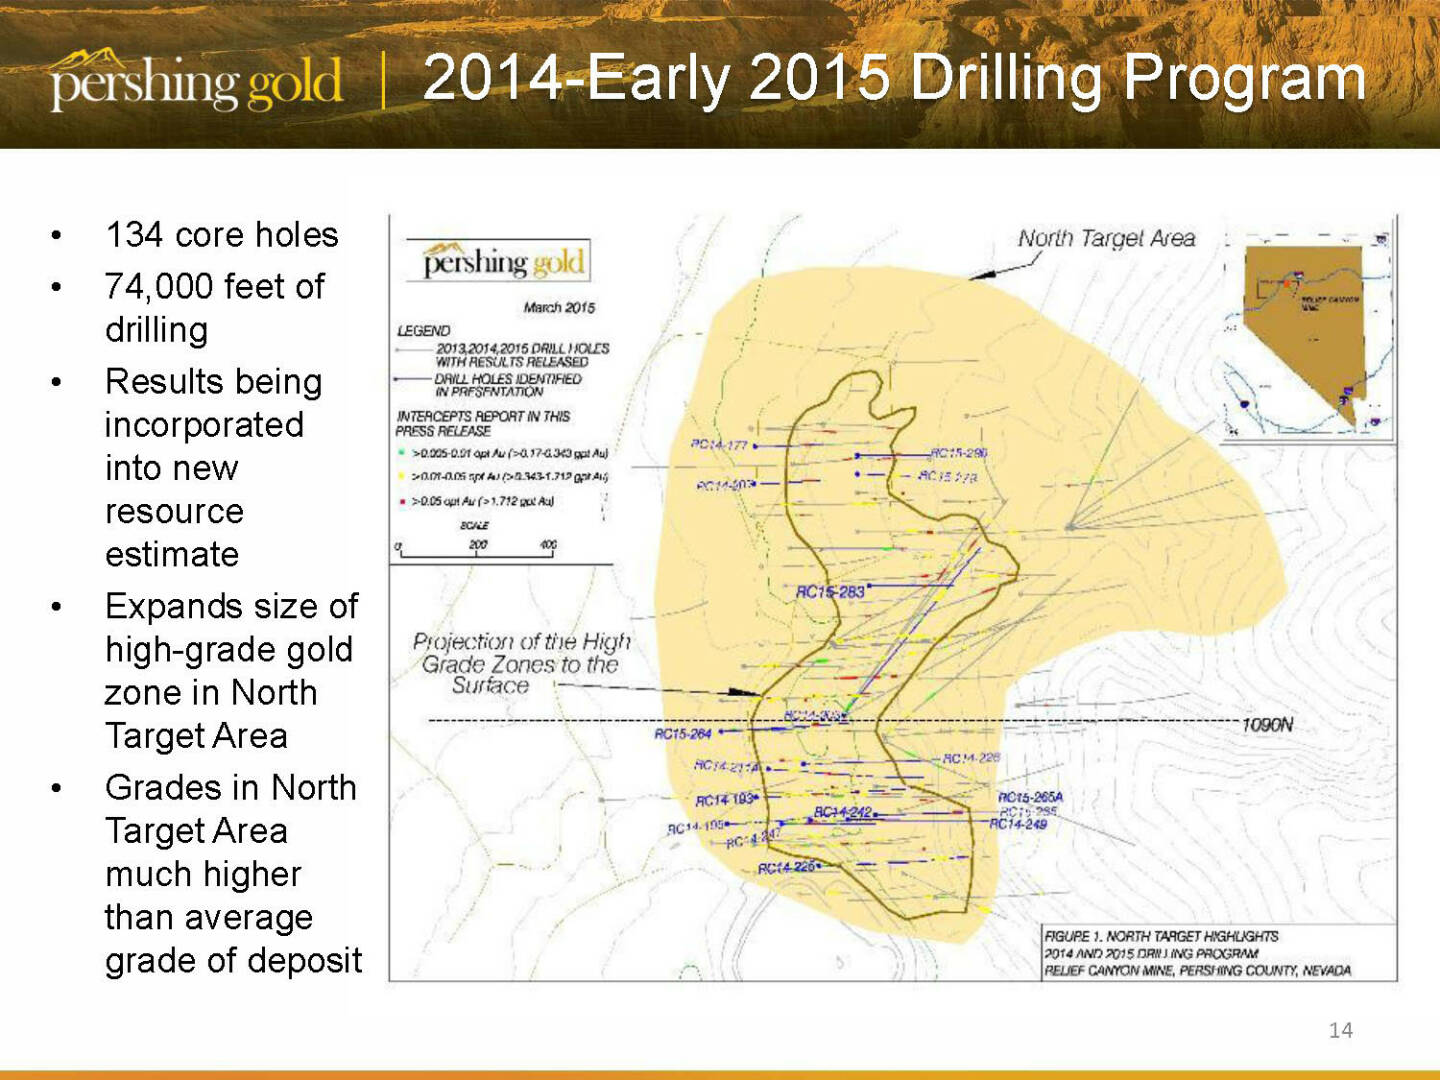 2014-Early 2015 drilling program - Pershing Gold